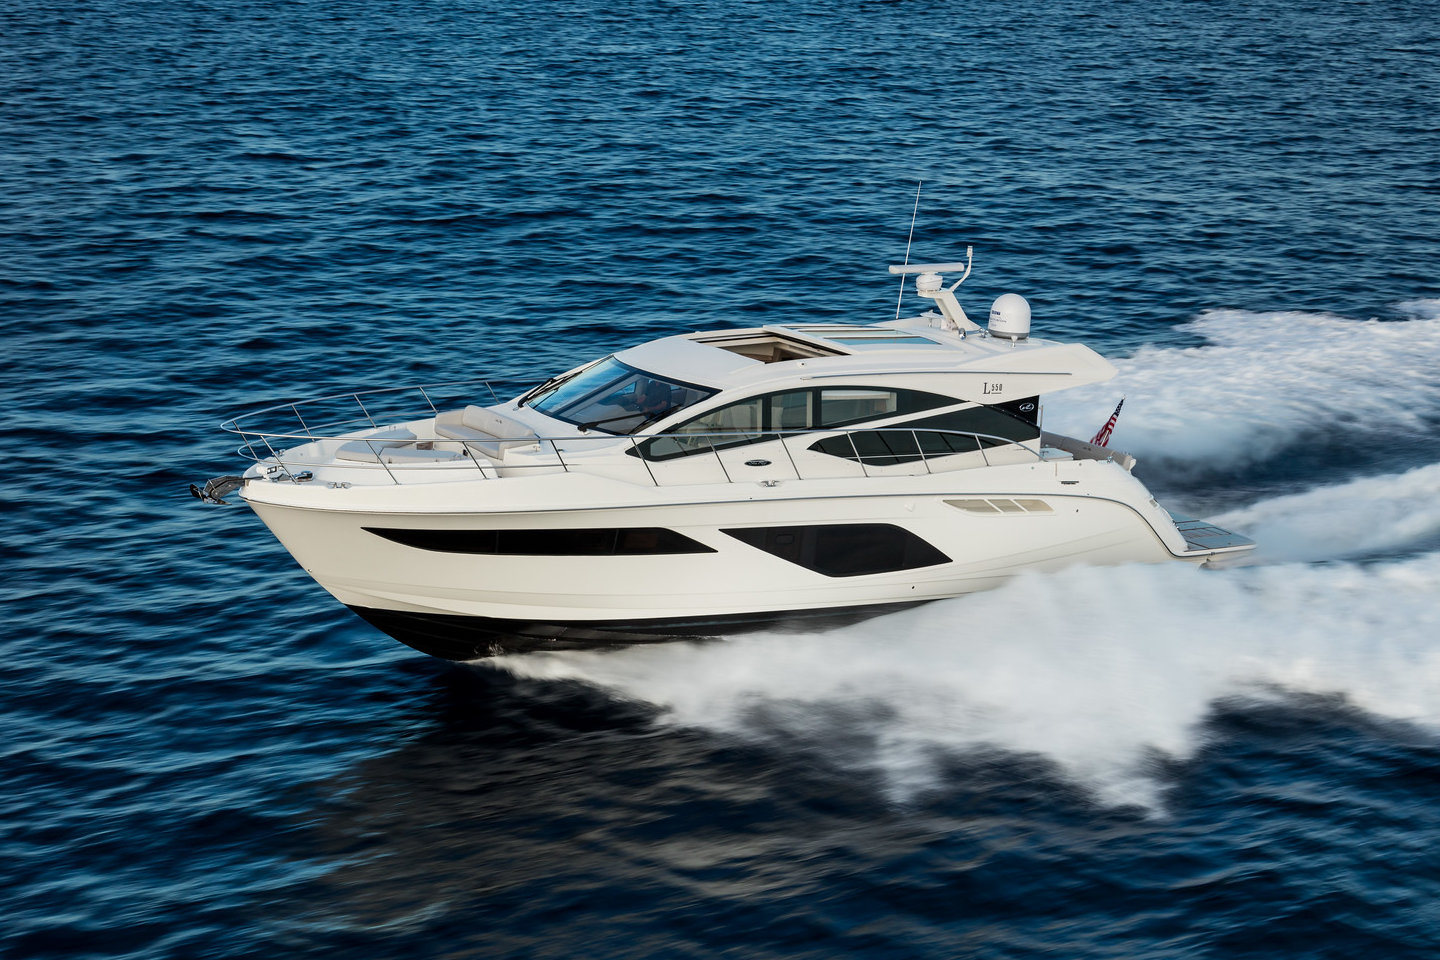 360 VR Virtual Tours of the Sea Ray L550